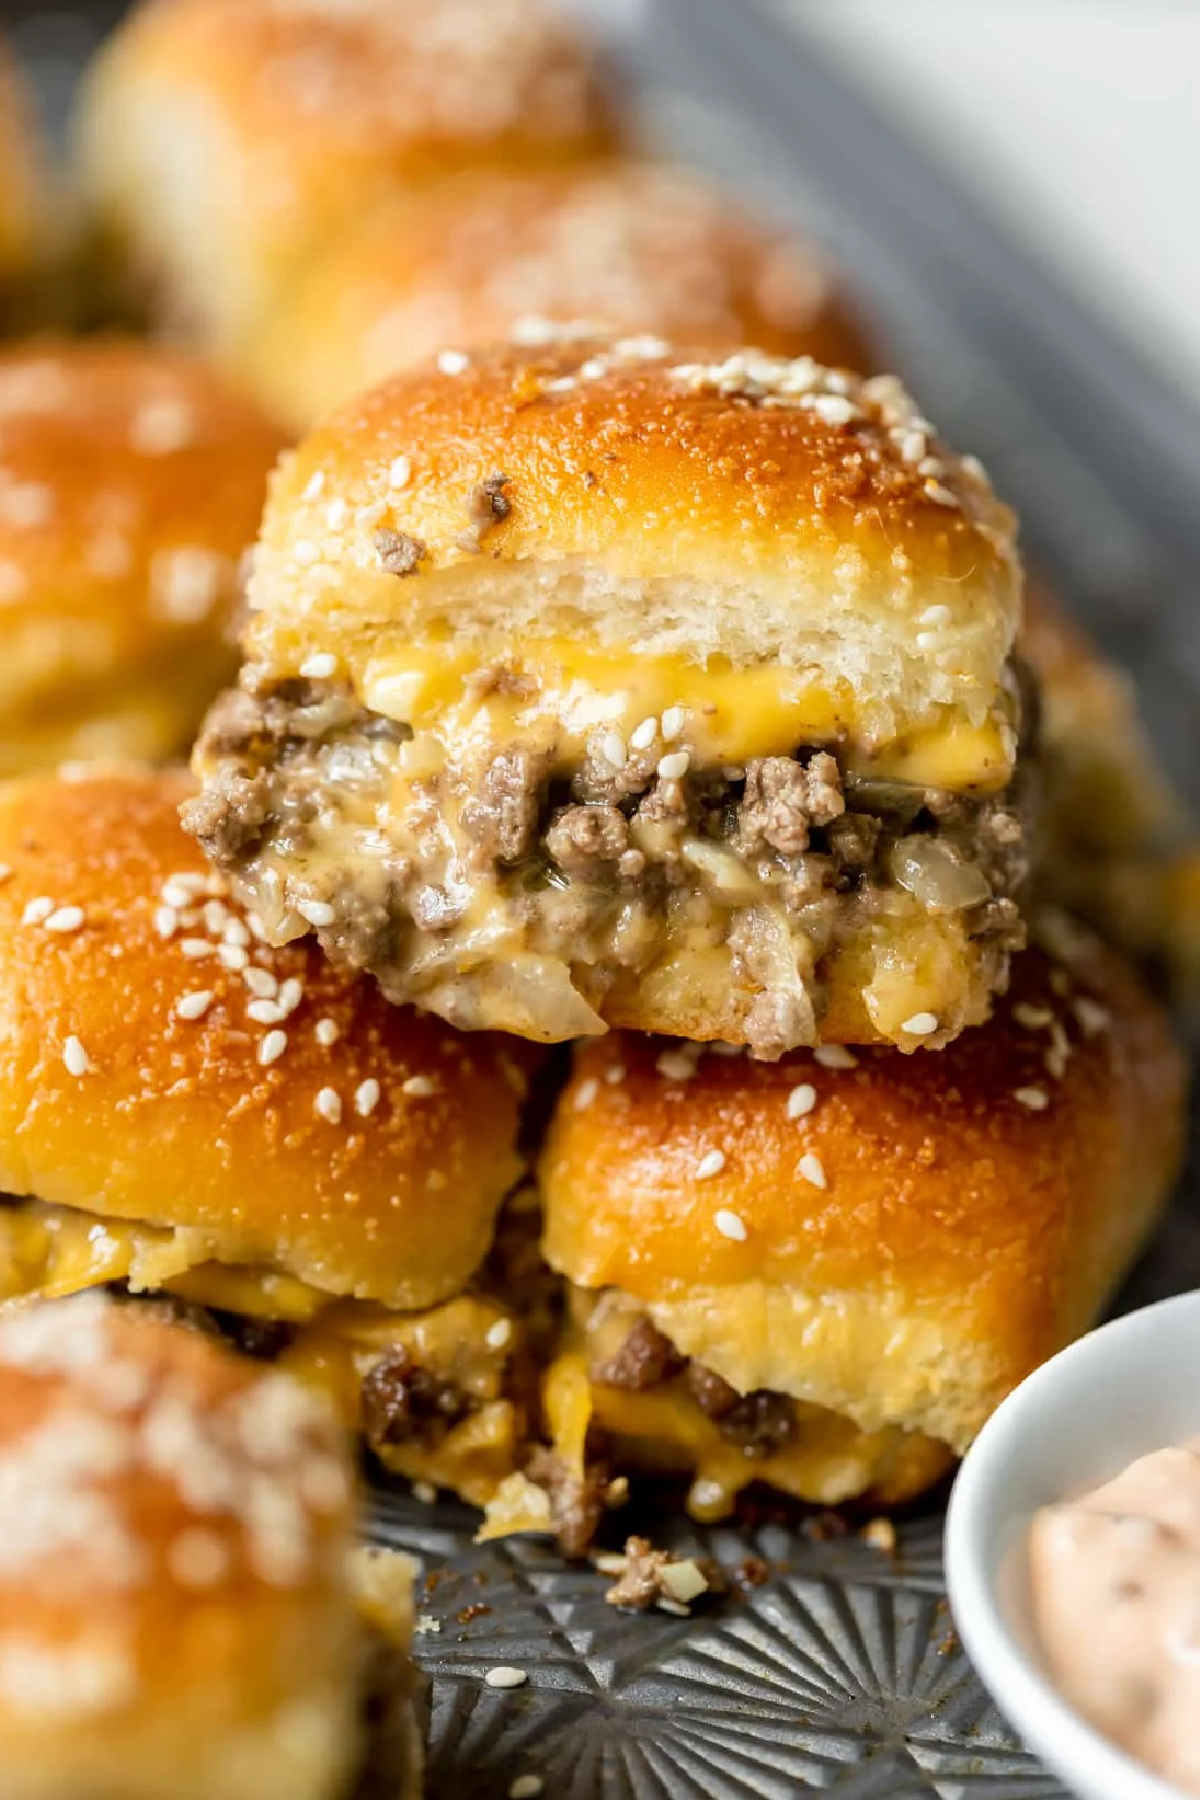 Cheap Party Food Ideas - Slider Burgers with Basic Toppings